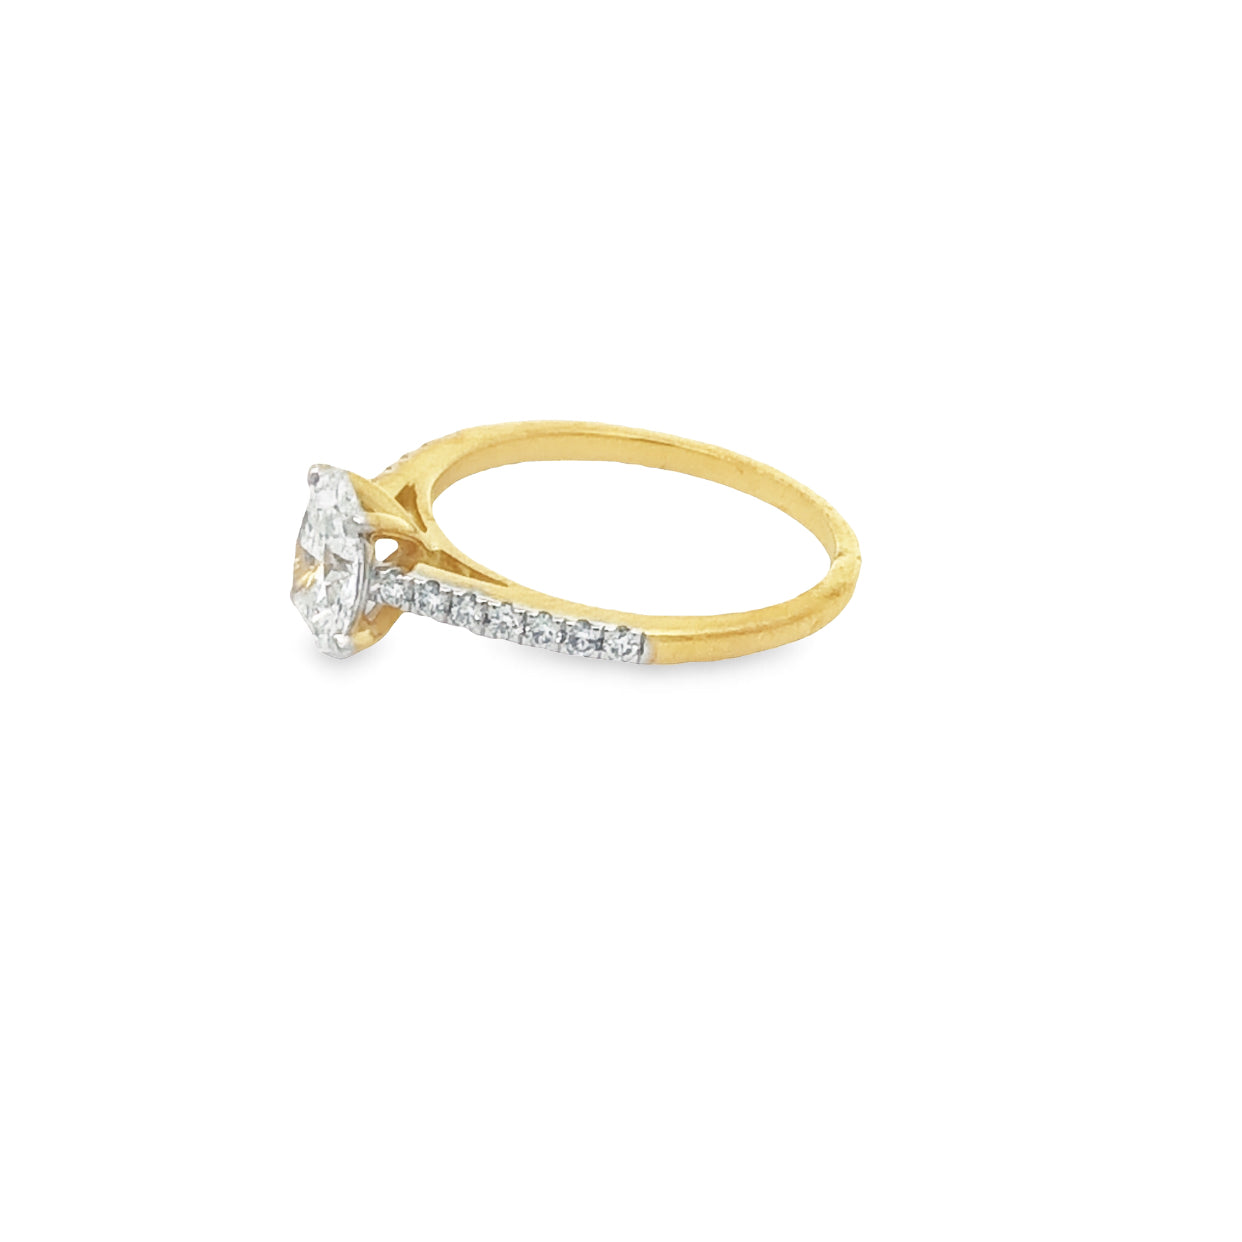 Yellow Gold Oval Shaped Lab Grown Diamond Engagement Ring With Shoulder Diamonds